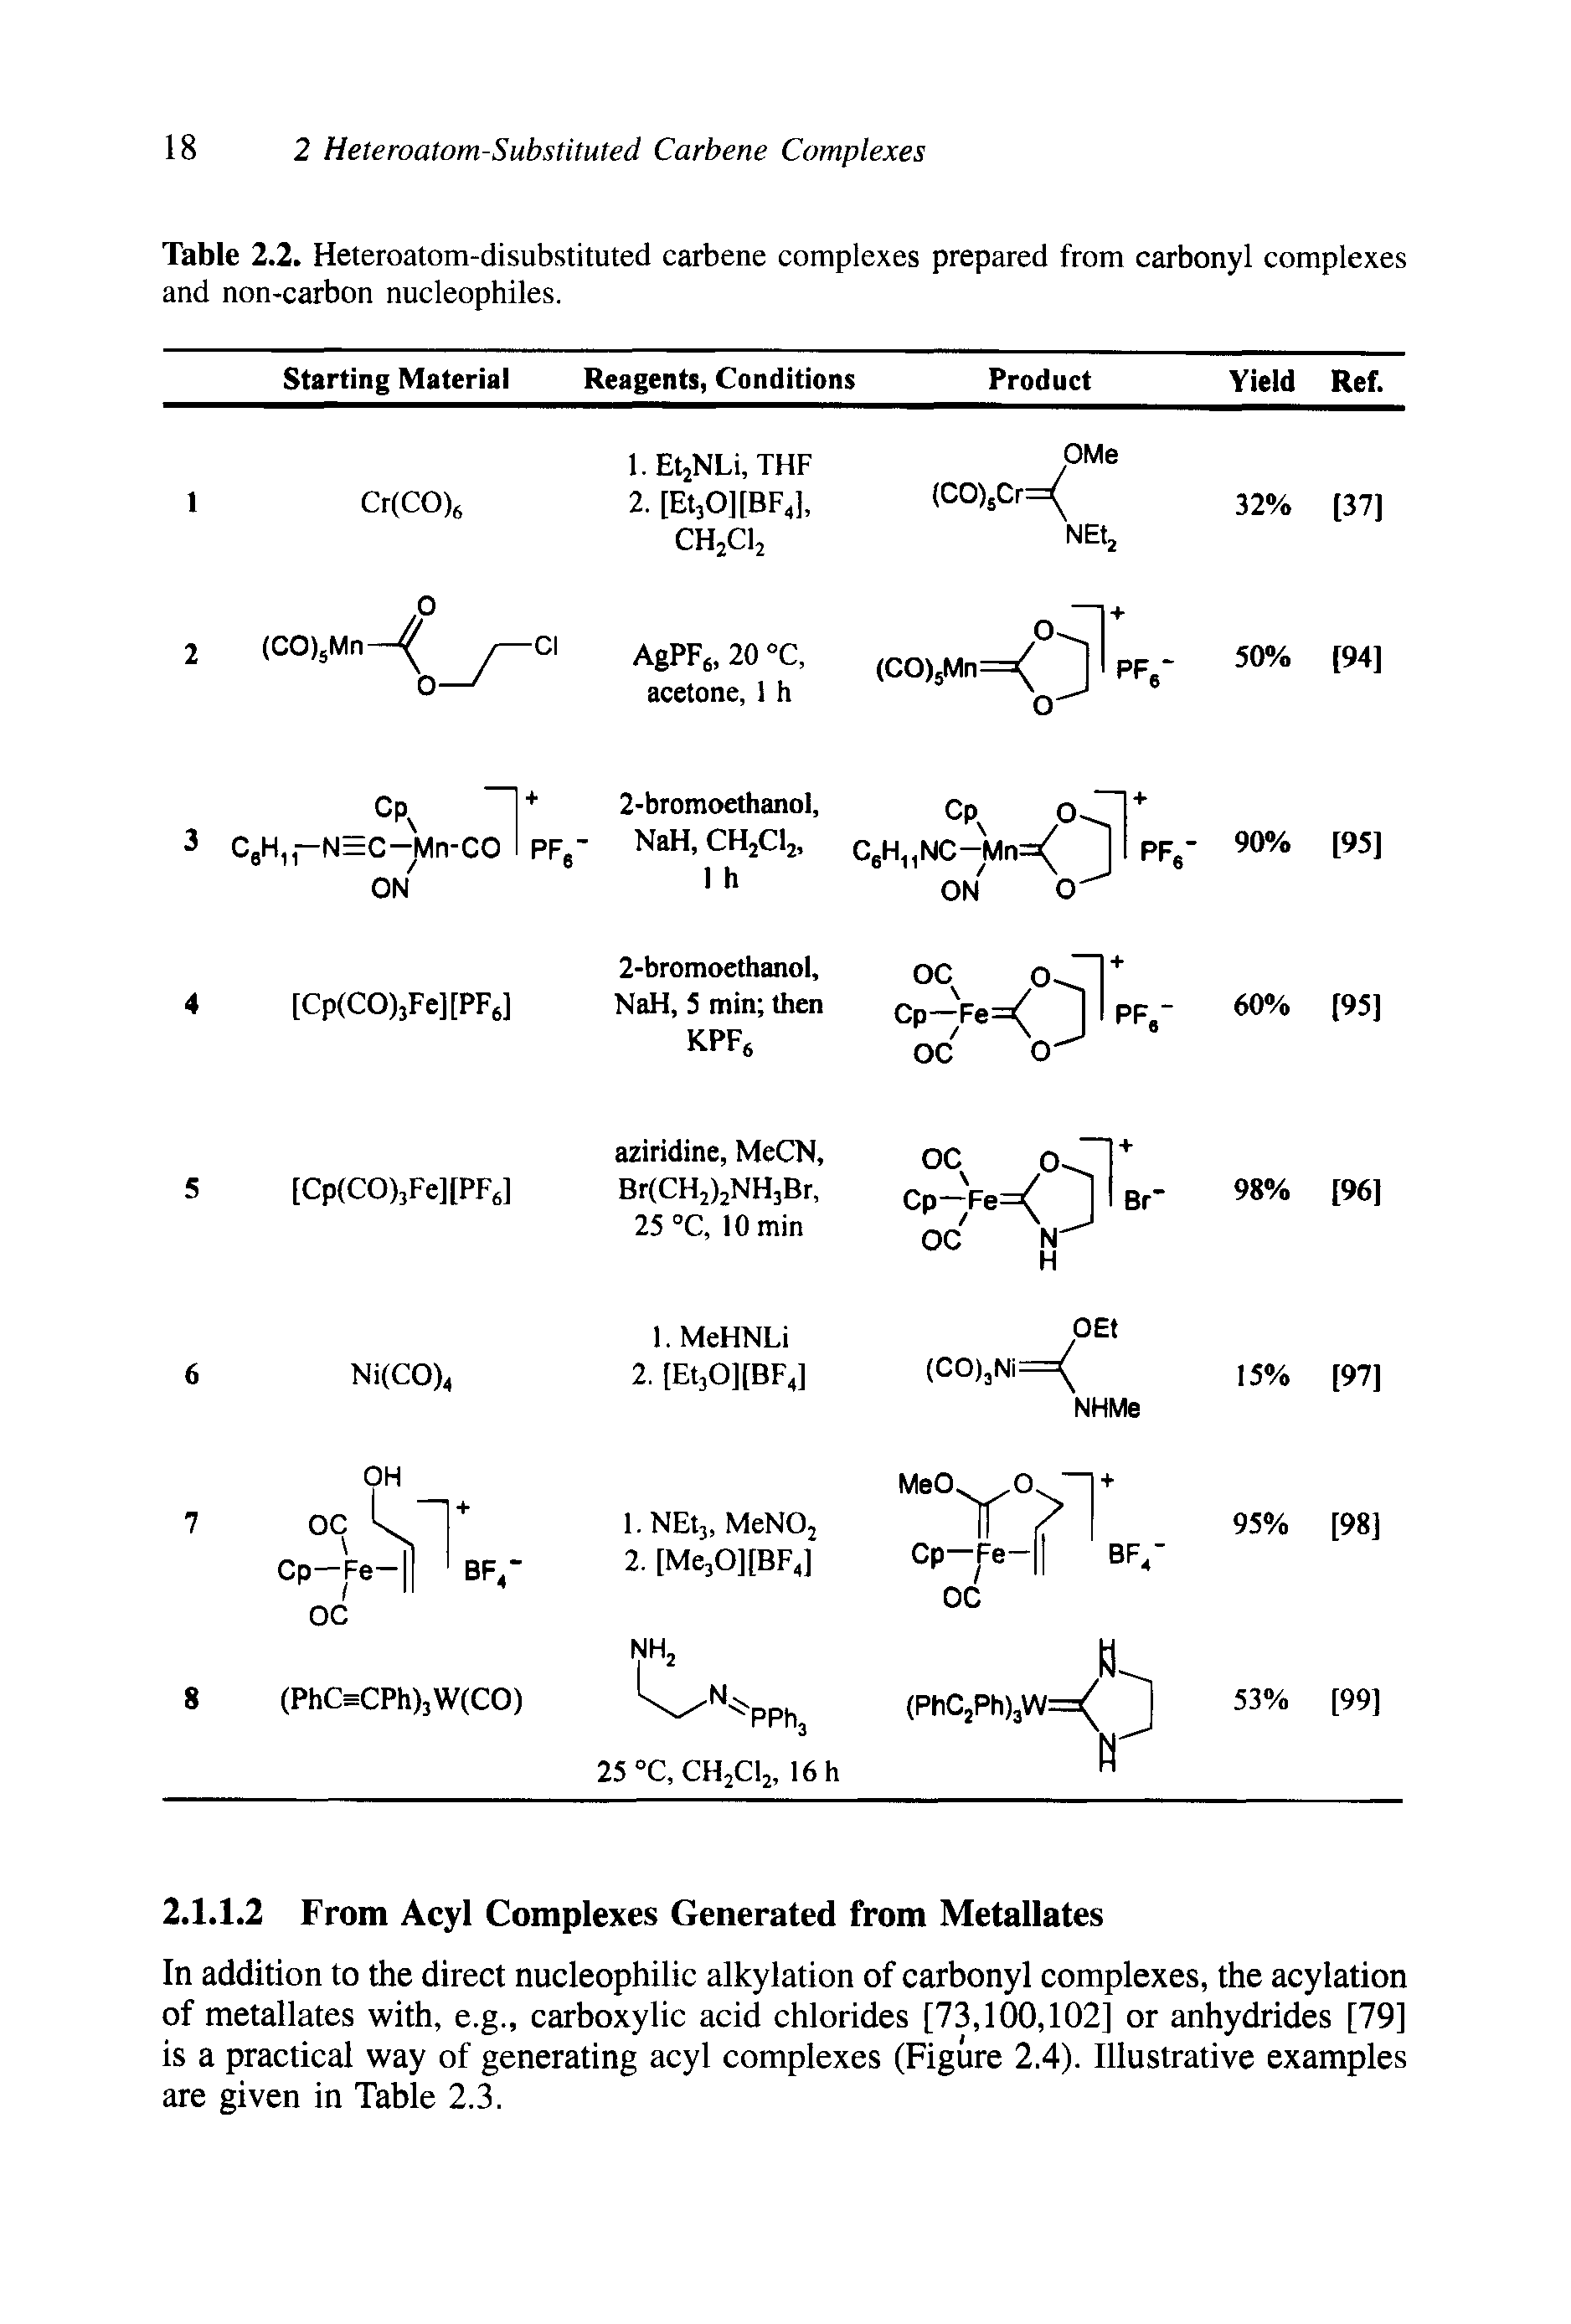 Table 2.2. Heteroatom-disubstituted carbene complexes prepared from carbonyl complexes and non-carbon nucleophiles.